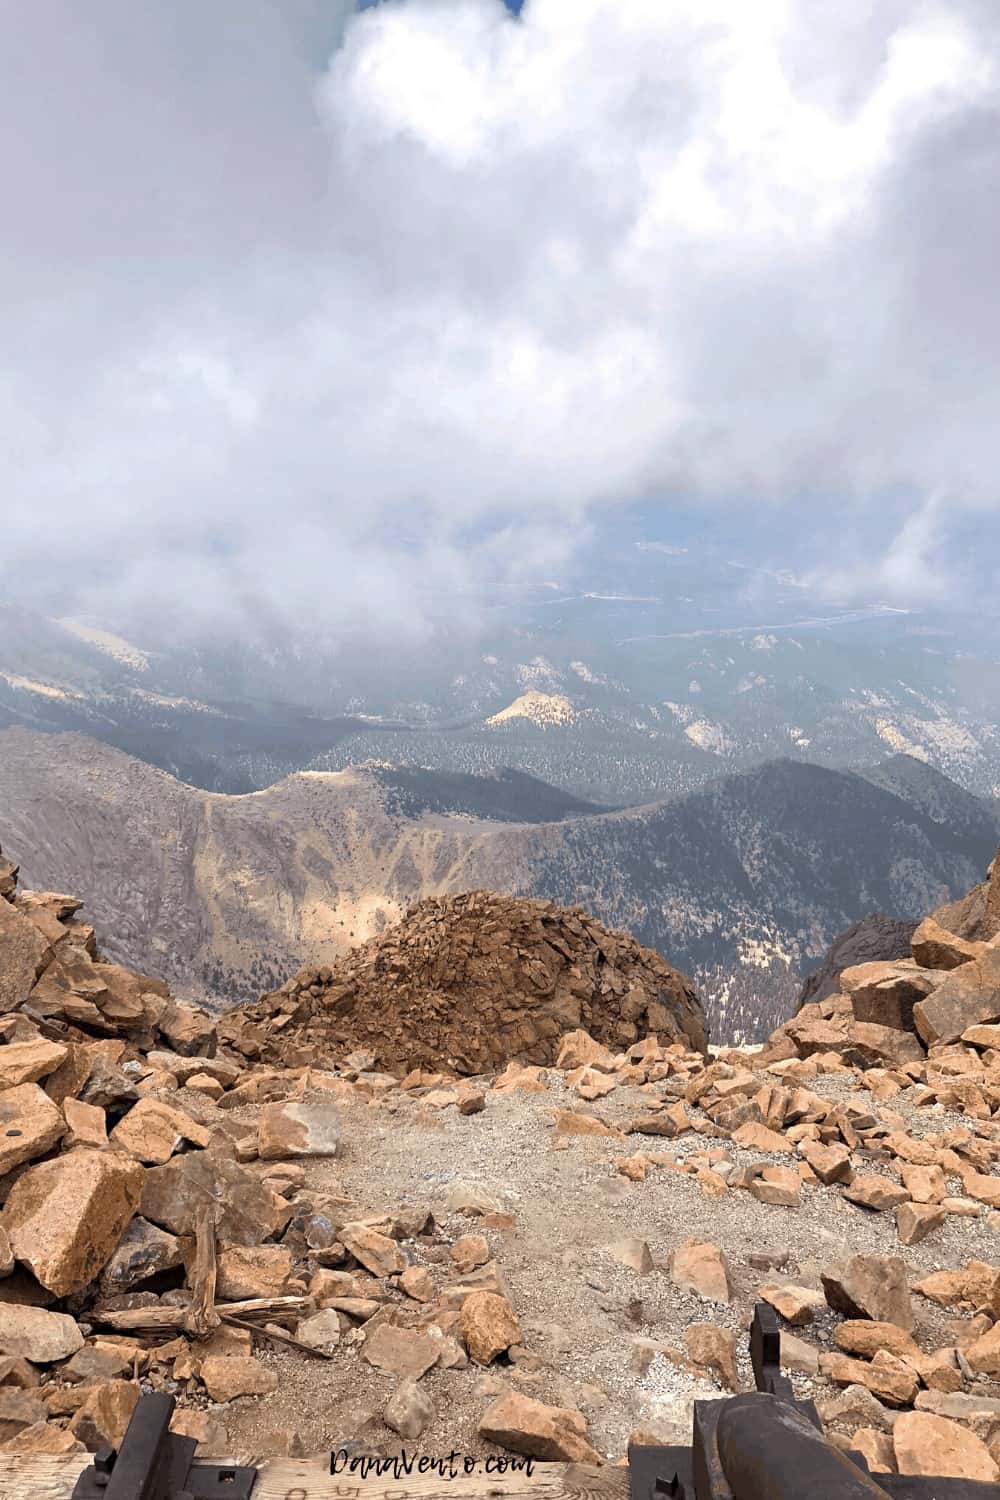 The Summit Pikes Peak Mountains and valleys